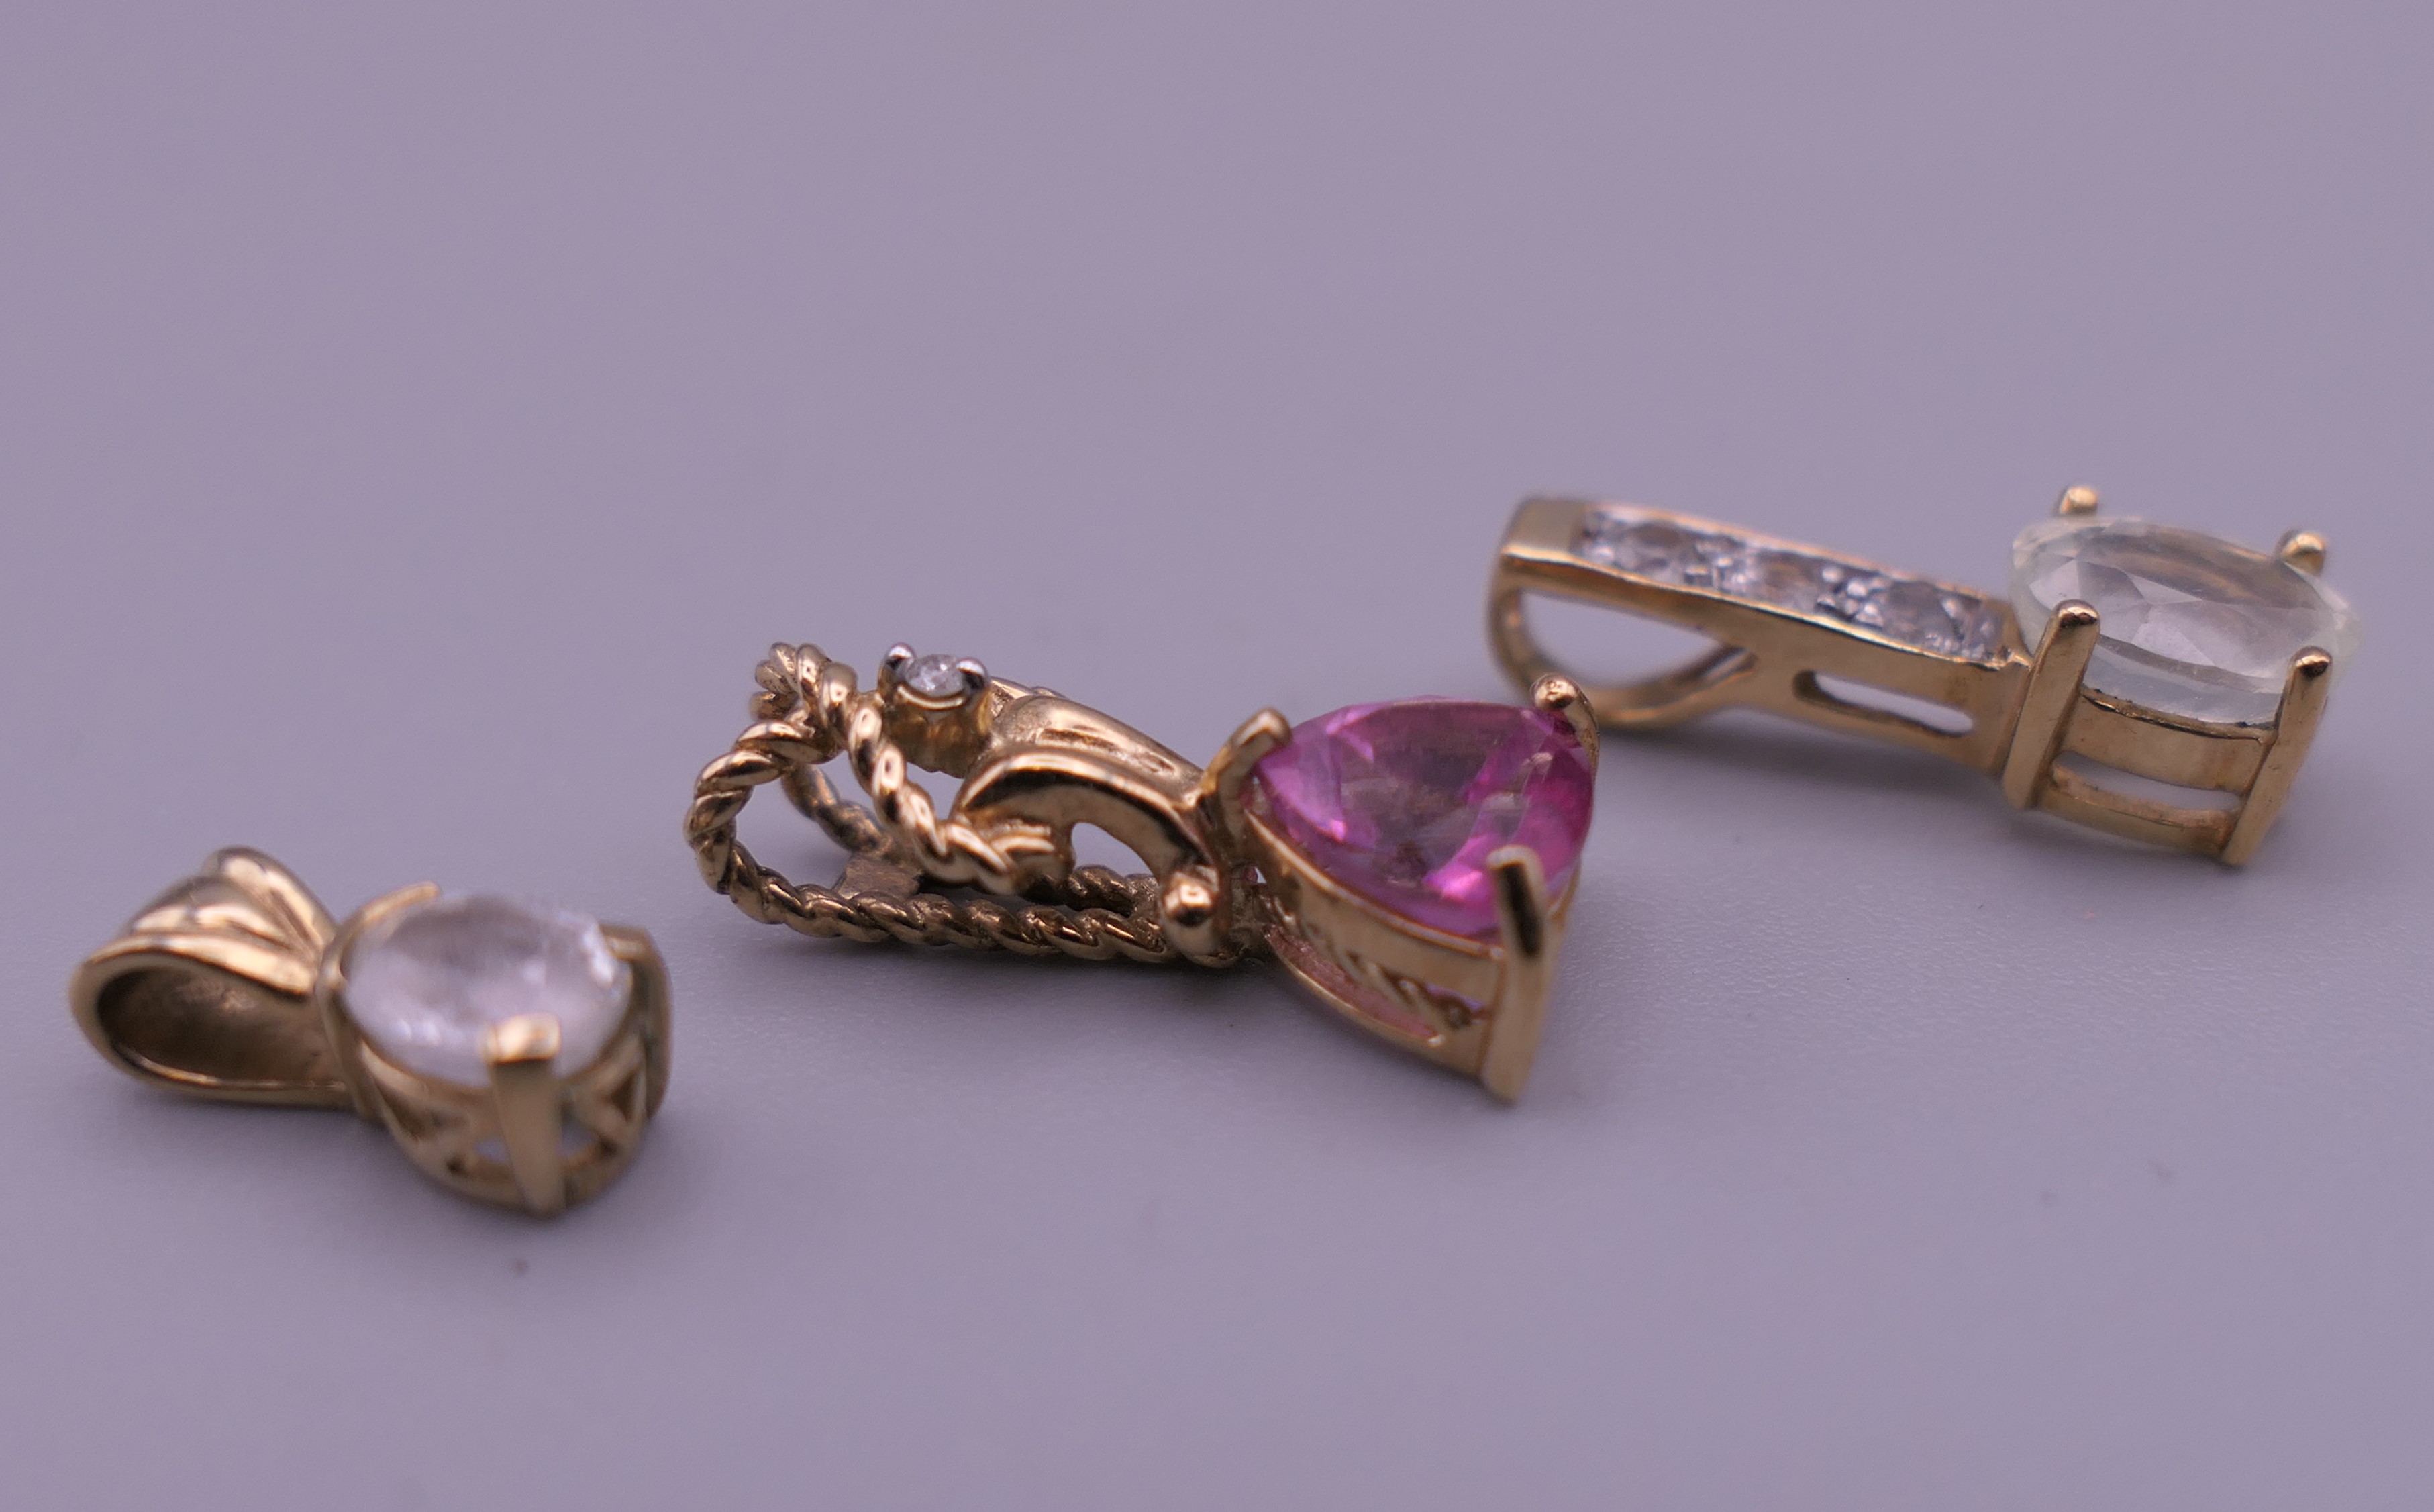 Five 9 ct gold pendants. Largest 1.5 cm high. 4.9 grammes total weight. - Image 3 of 5